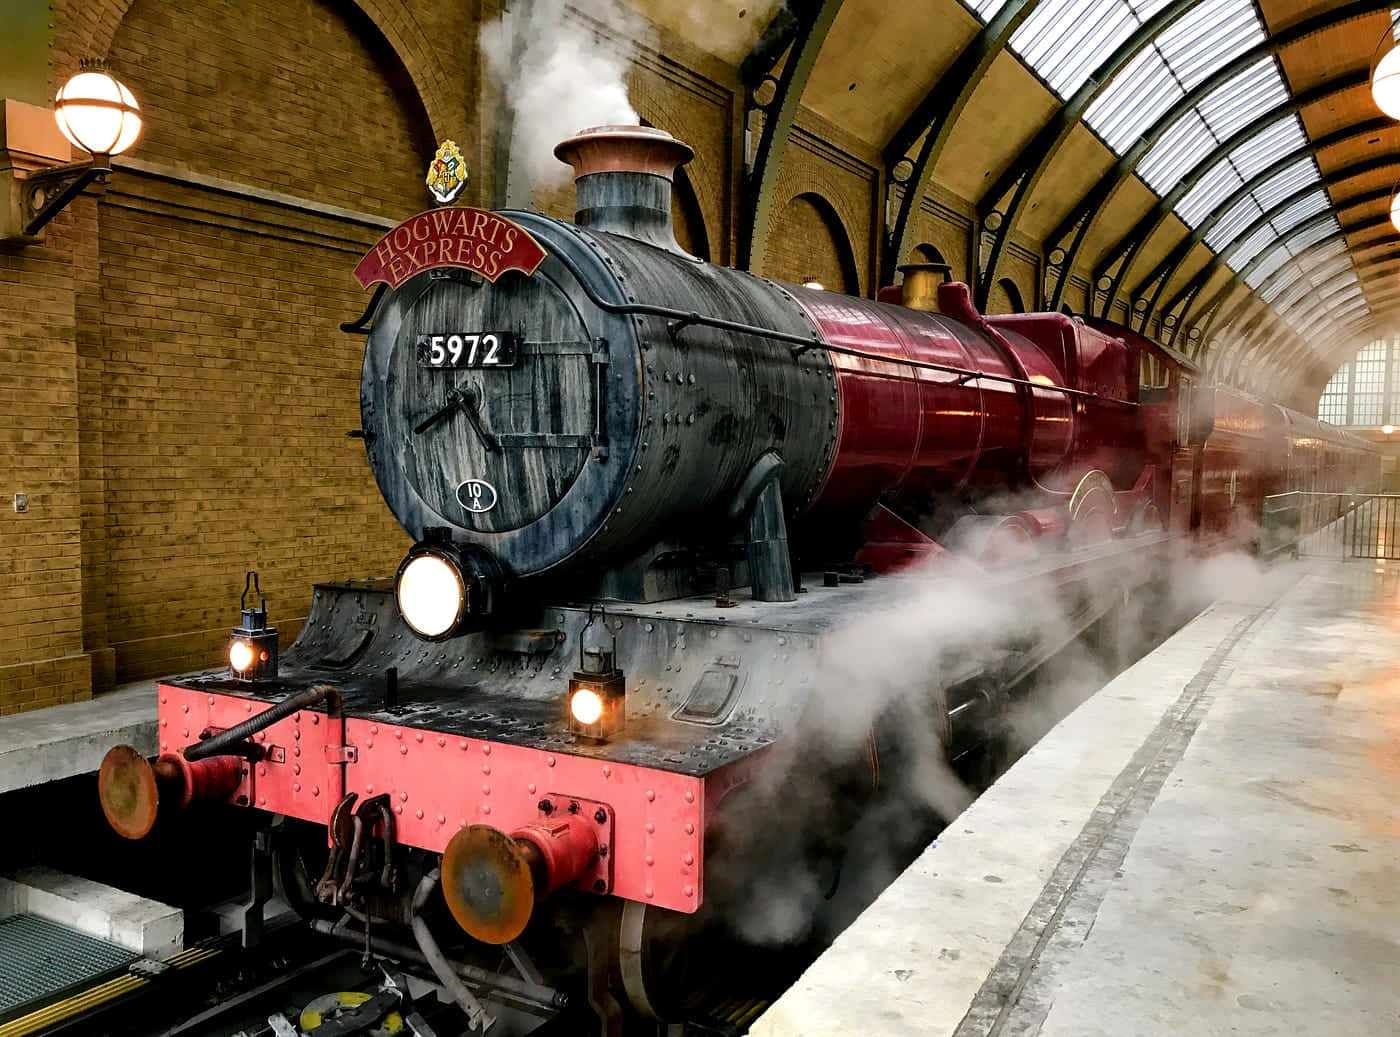 Hogwarts Express crossing a scenic countryside Wallpaper